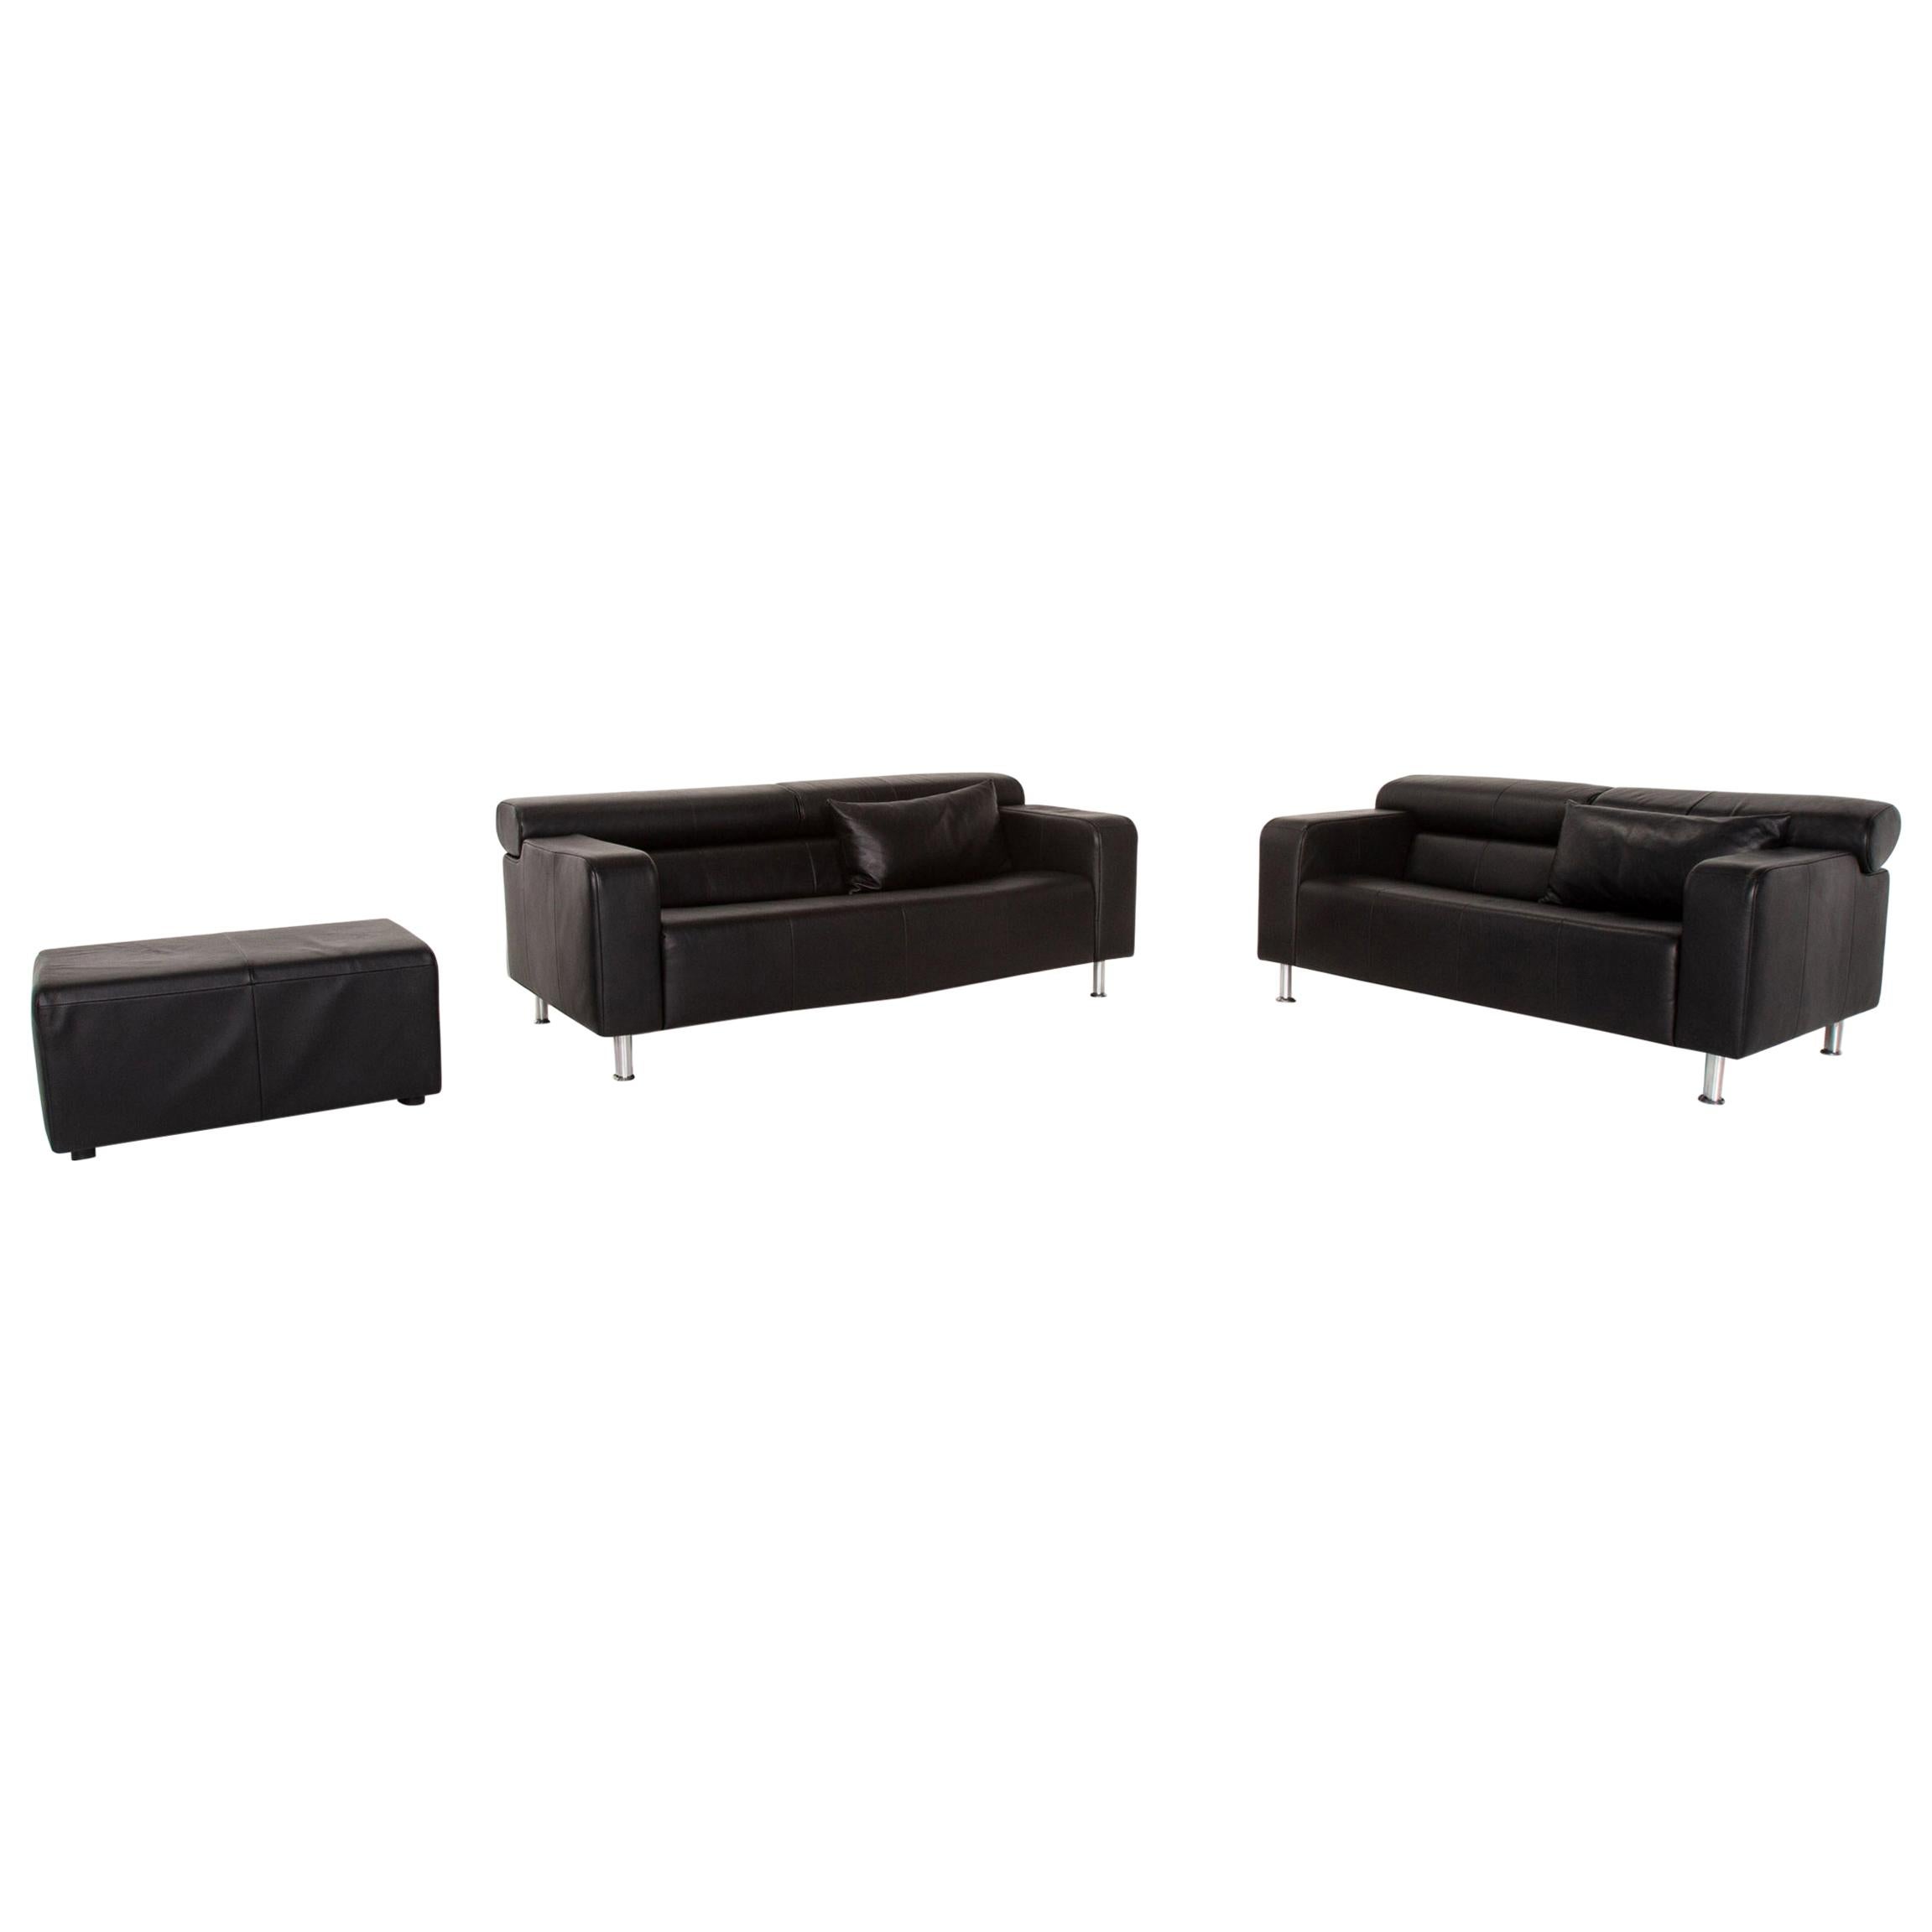 Rolf Benz AK 422 Leather Sofa Black Three-Seat Couch For Sale